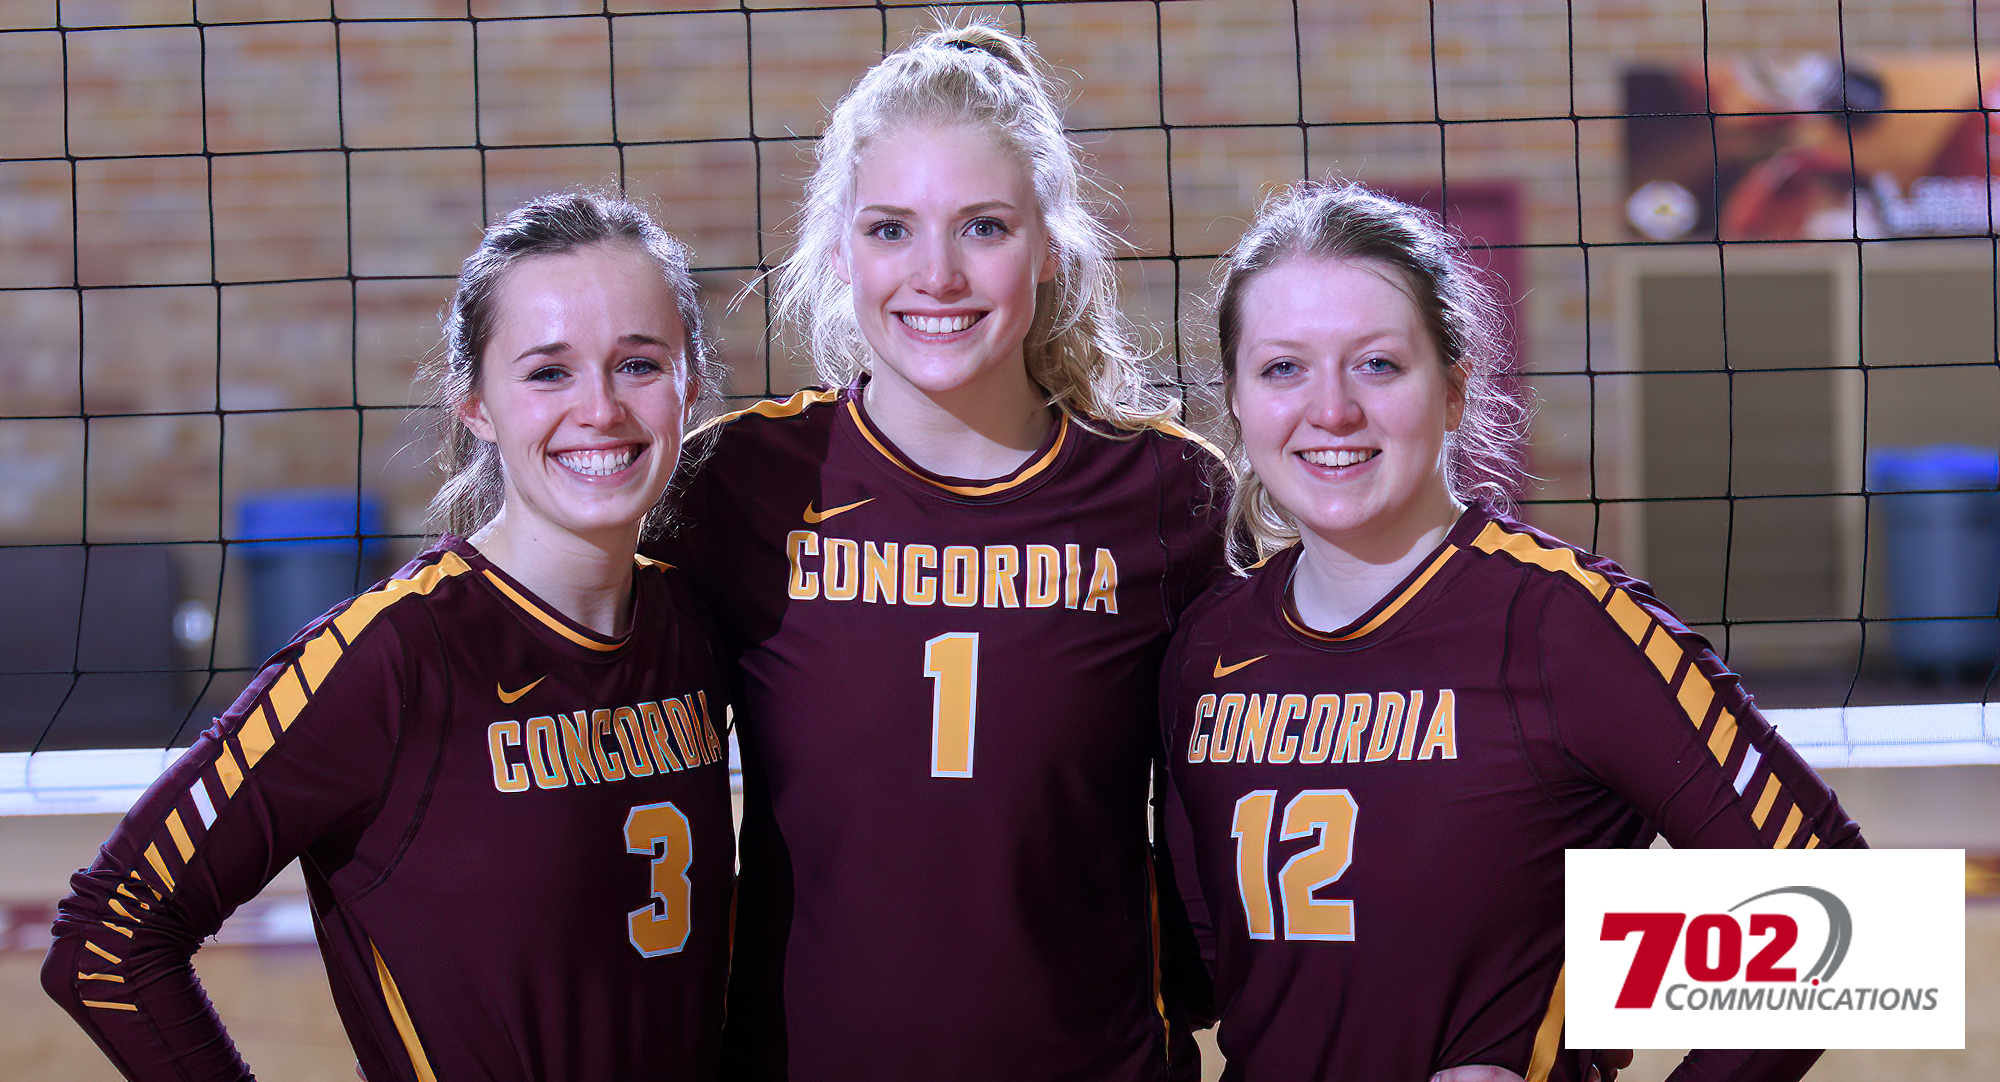 The Cobber senior trio of Jill Klaphake (L), Bailey Gronner and Lexi Turn combined for 10 kills, 29 assists and 23 digs in helping CC sweep St. Kate's in the final match of the year.